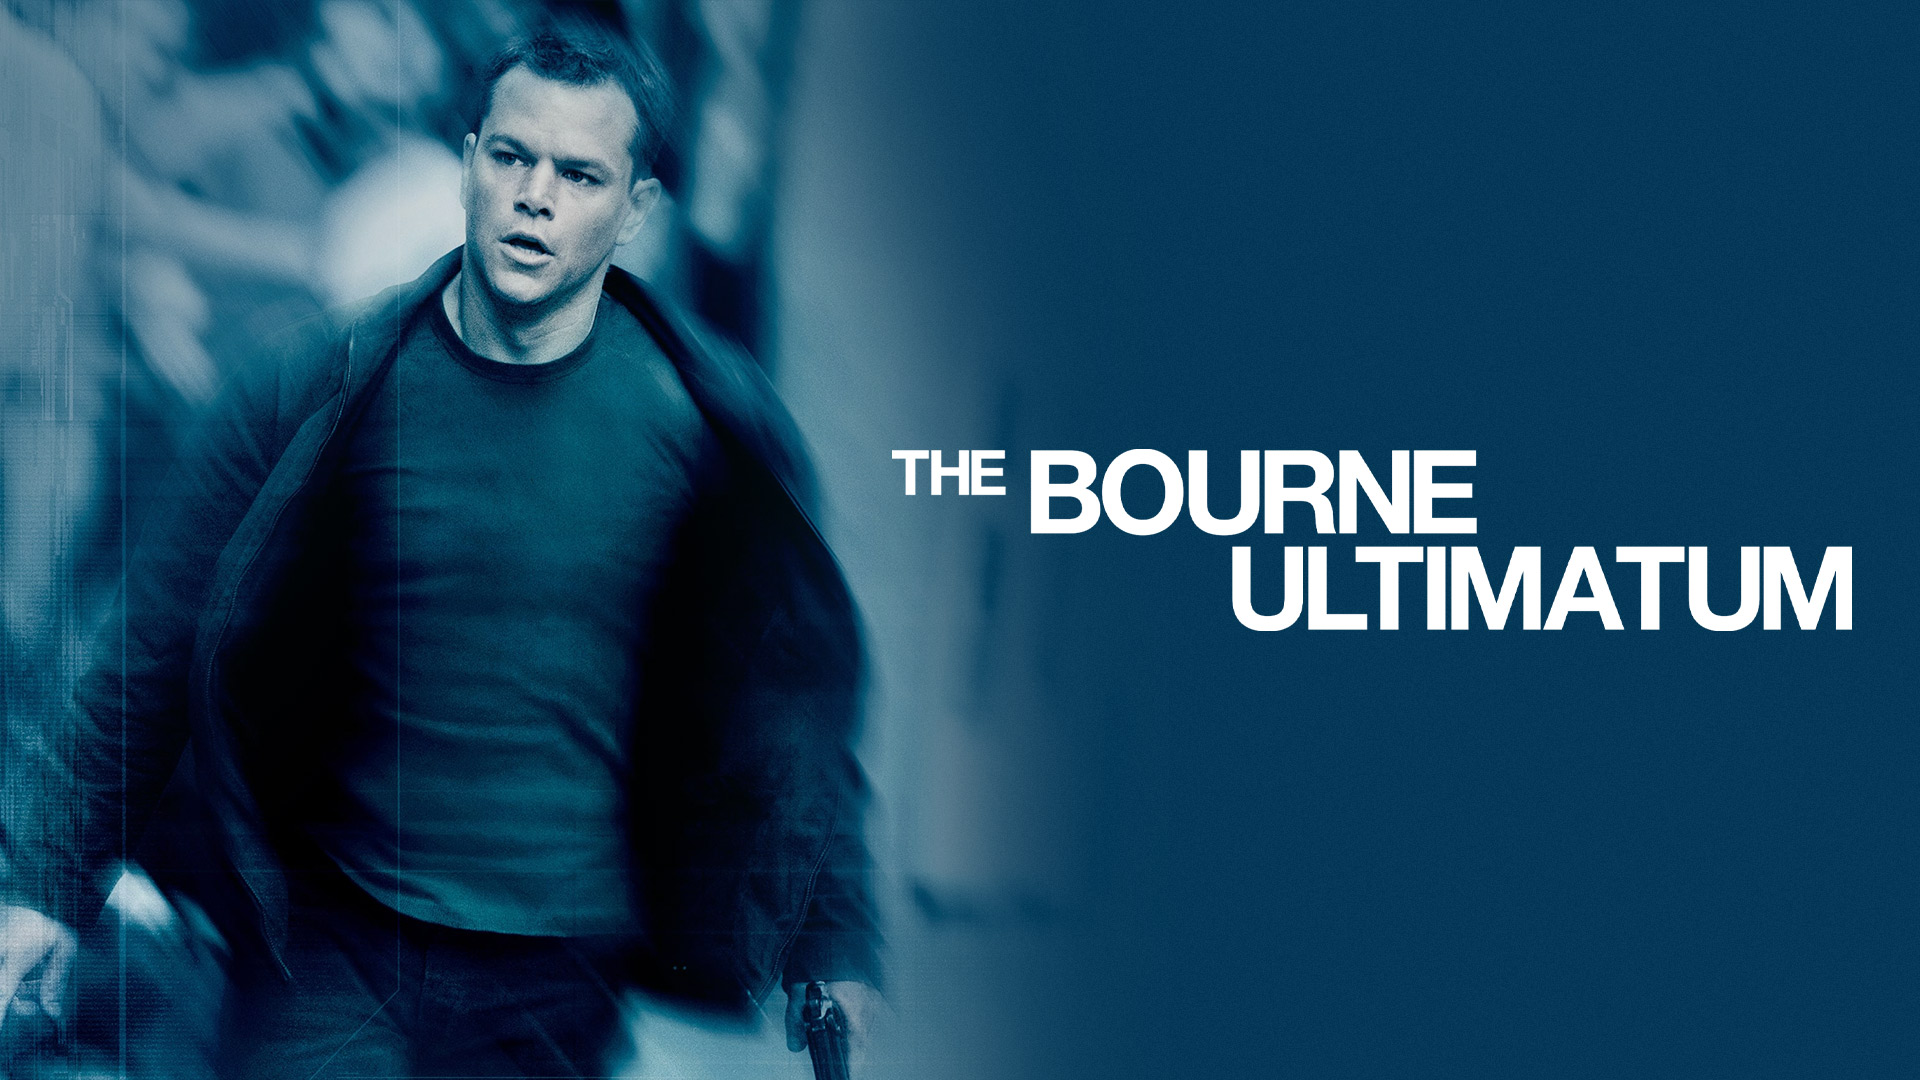 42-facts-about-the-movie-the-bourne-ultimatum